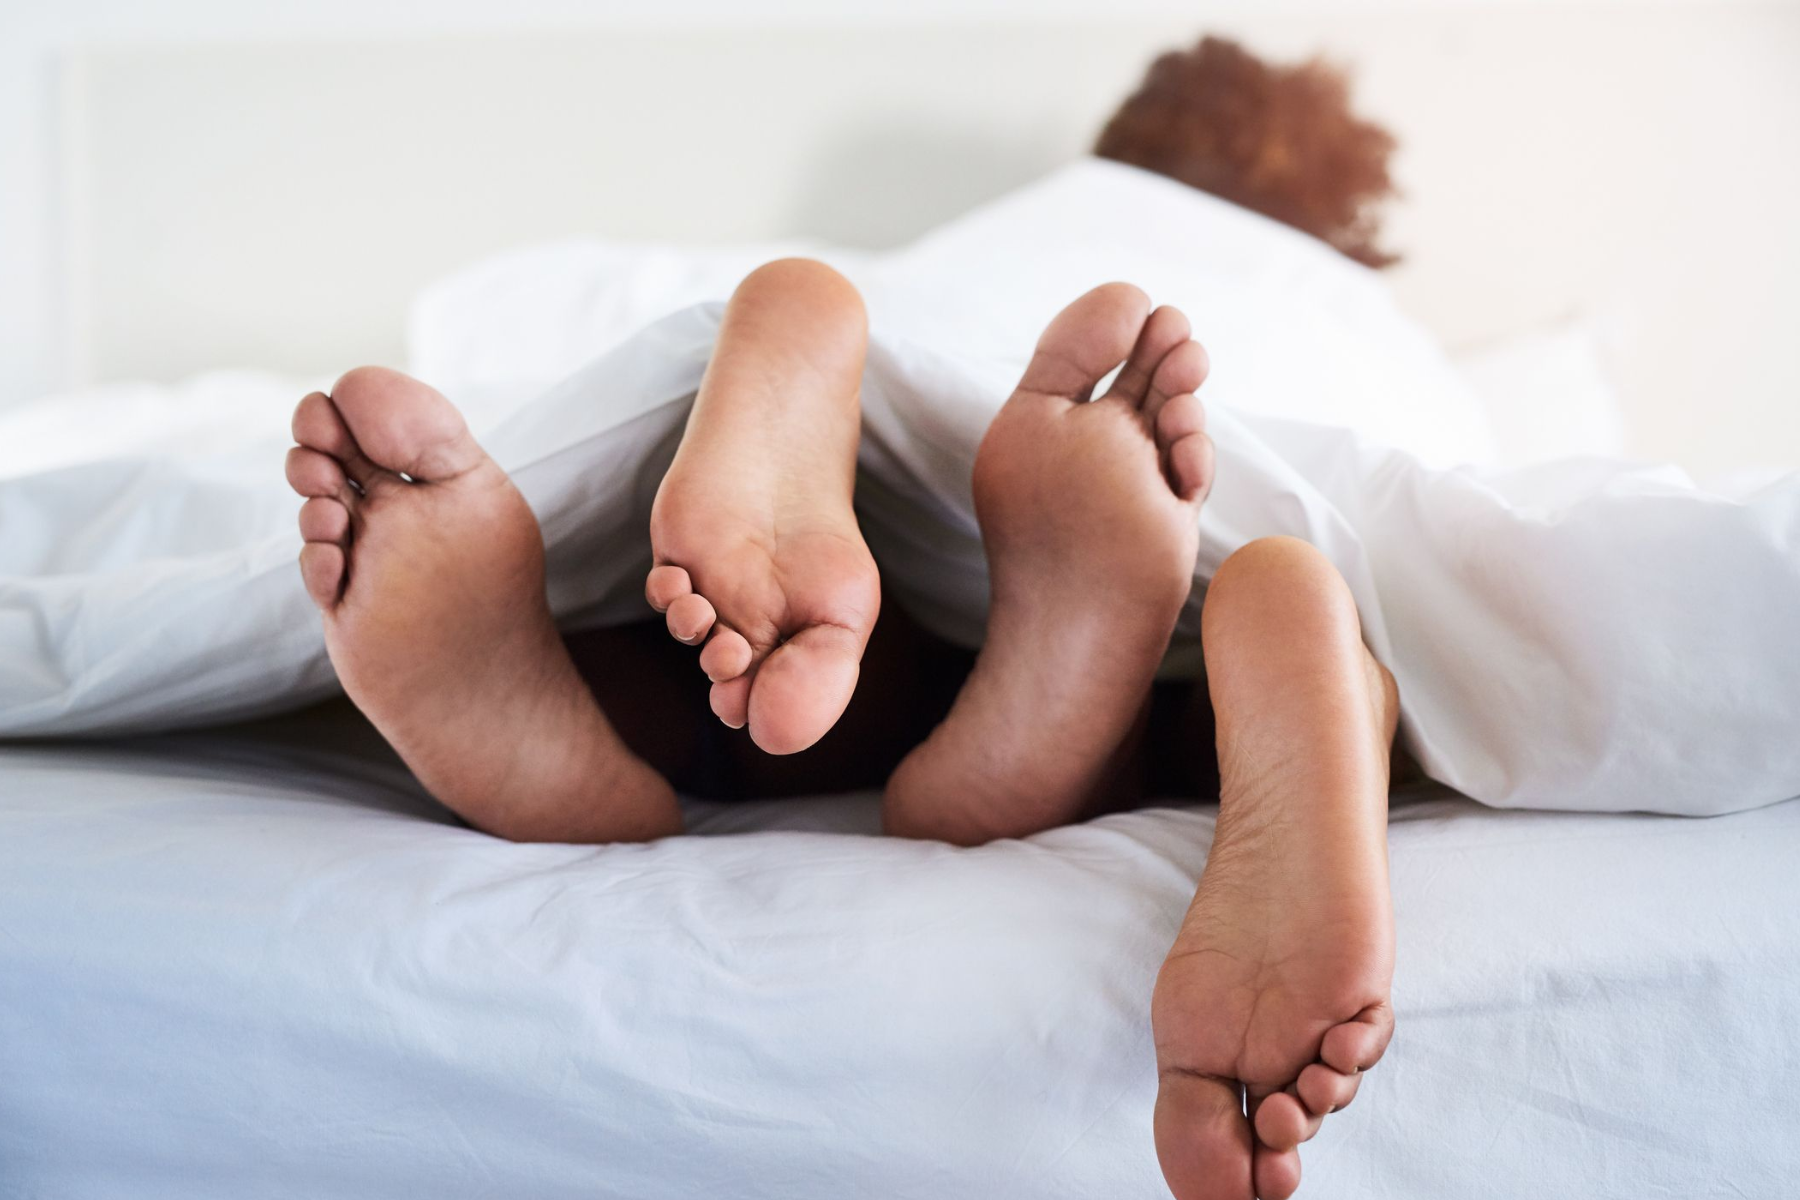 A man and a woman's feet are hidden beneath the bed sheet